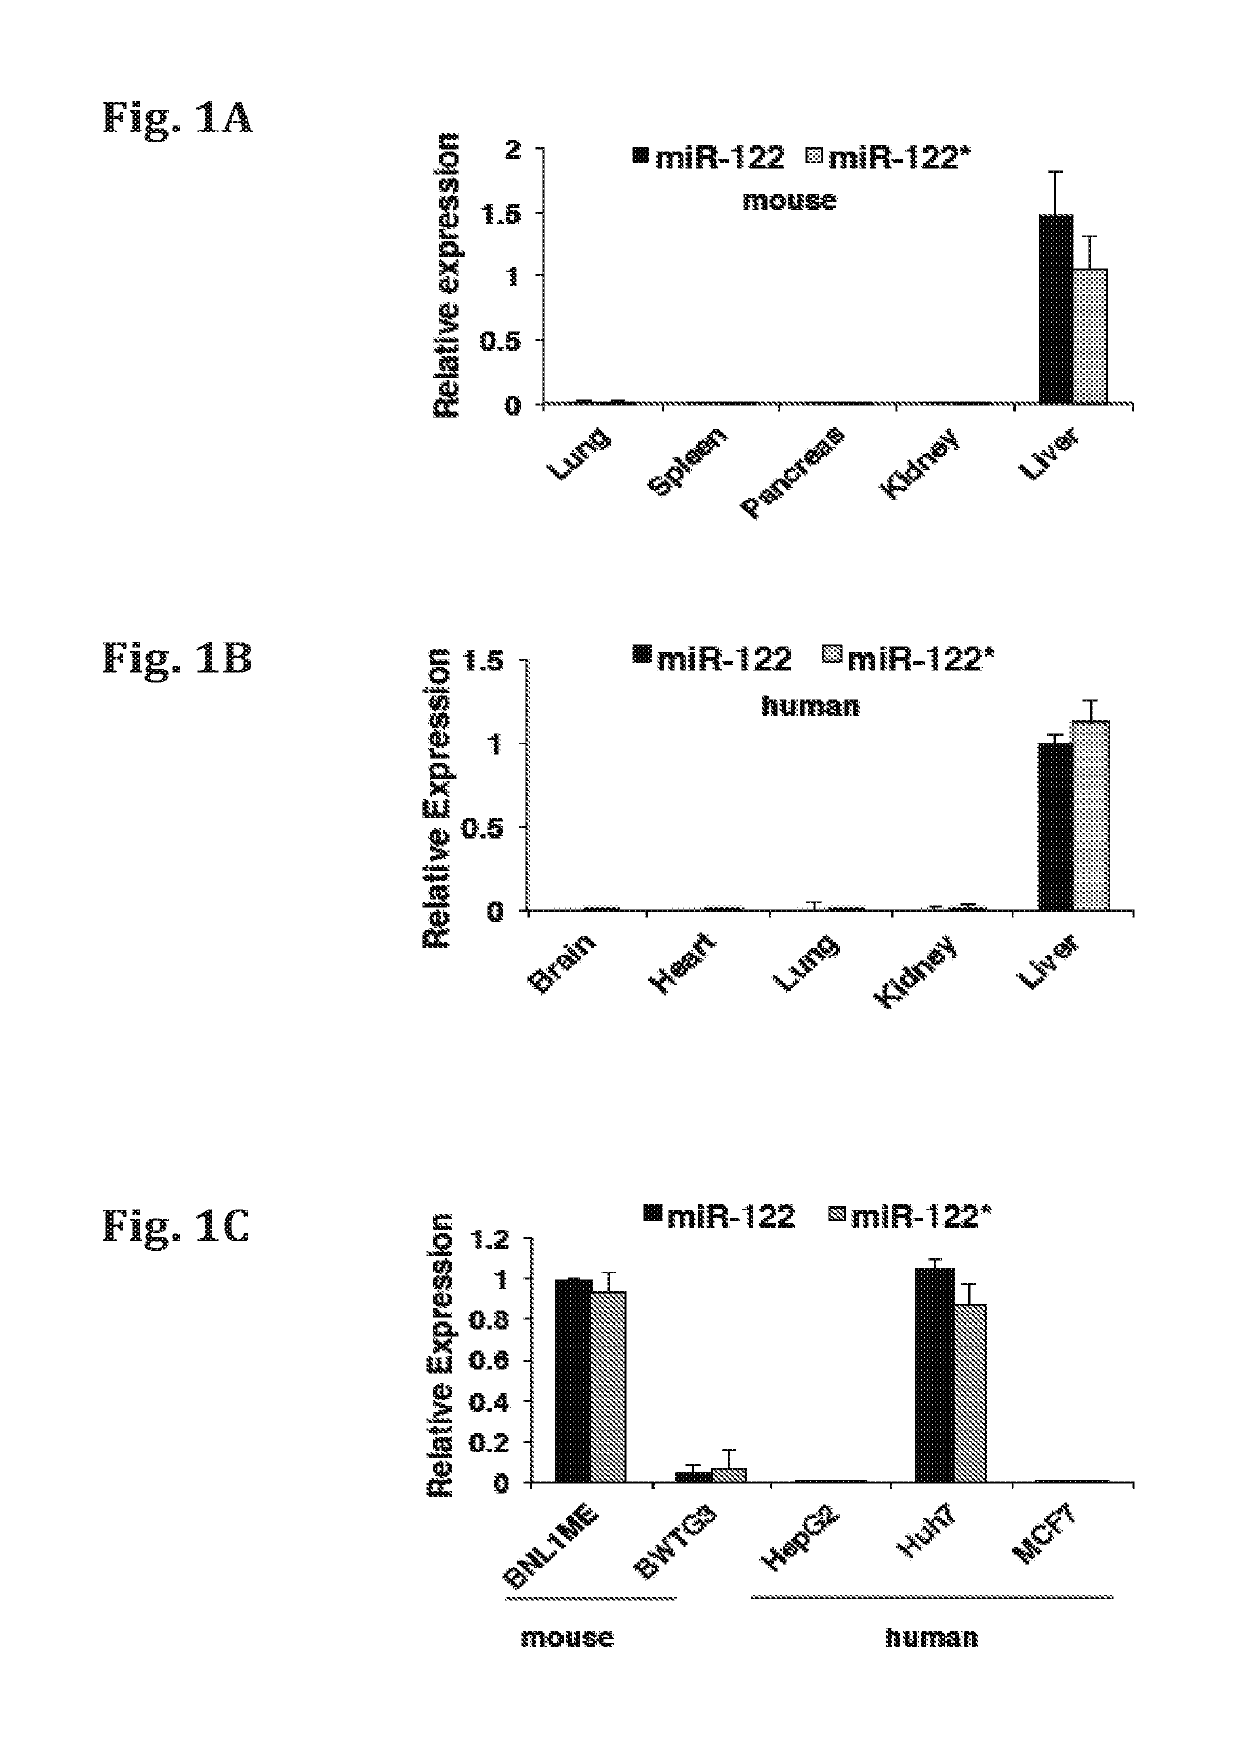 miR-122* as an active micro-RNA, compositions comprising the same and uses thereof